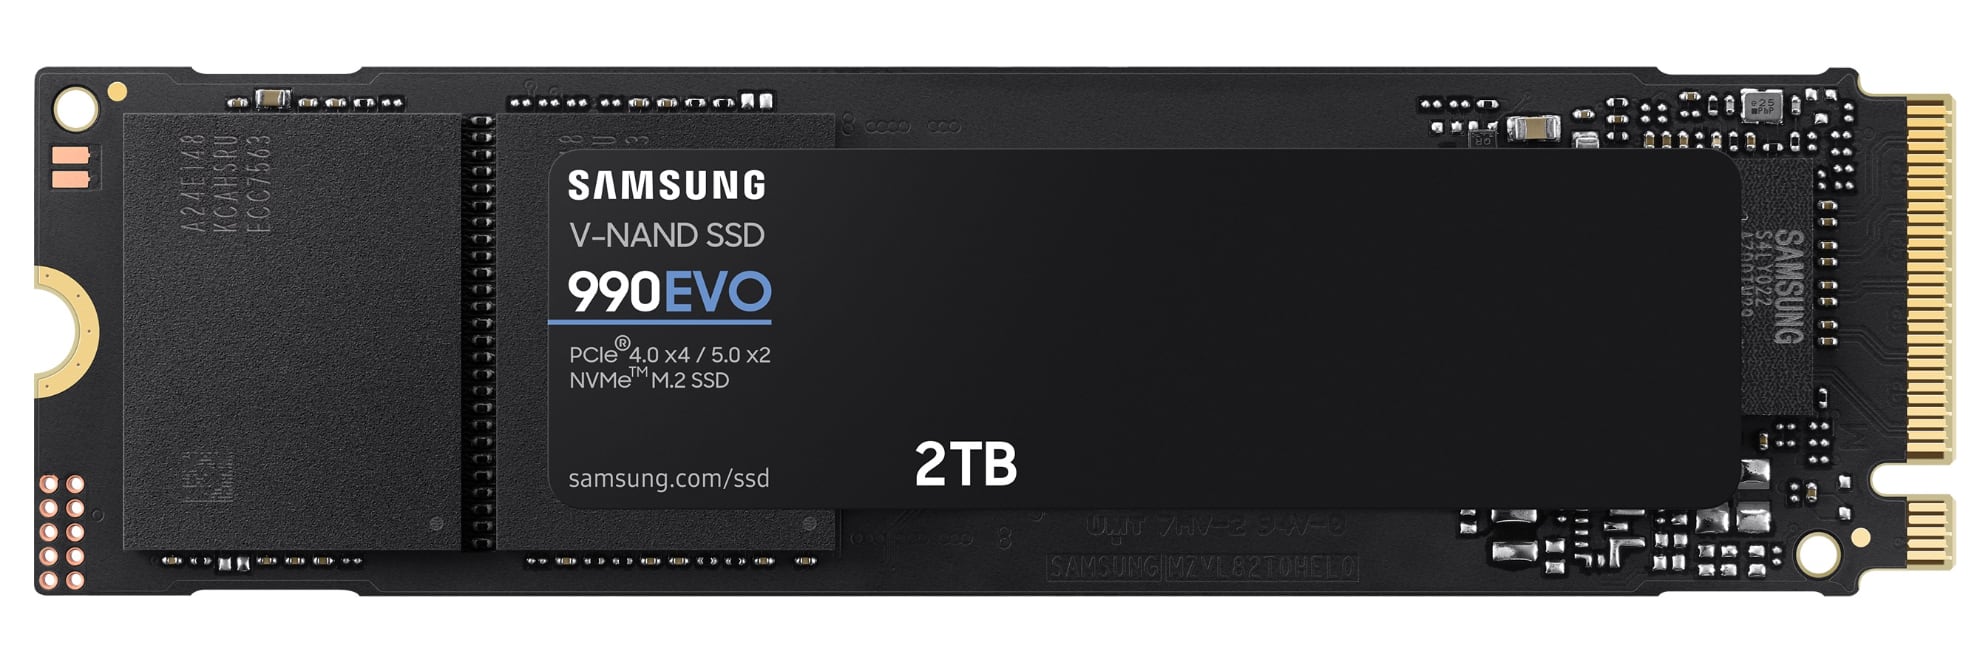 Samsung announces high-speed SSD 990 EVO, it will cost $210 for 2 TB-2